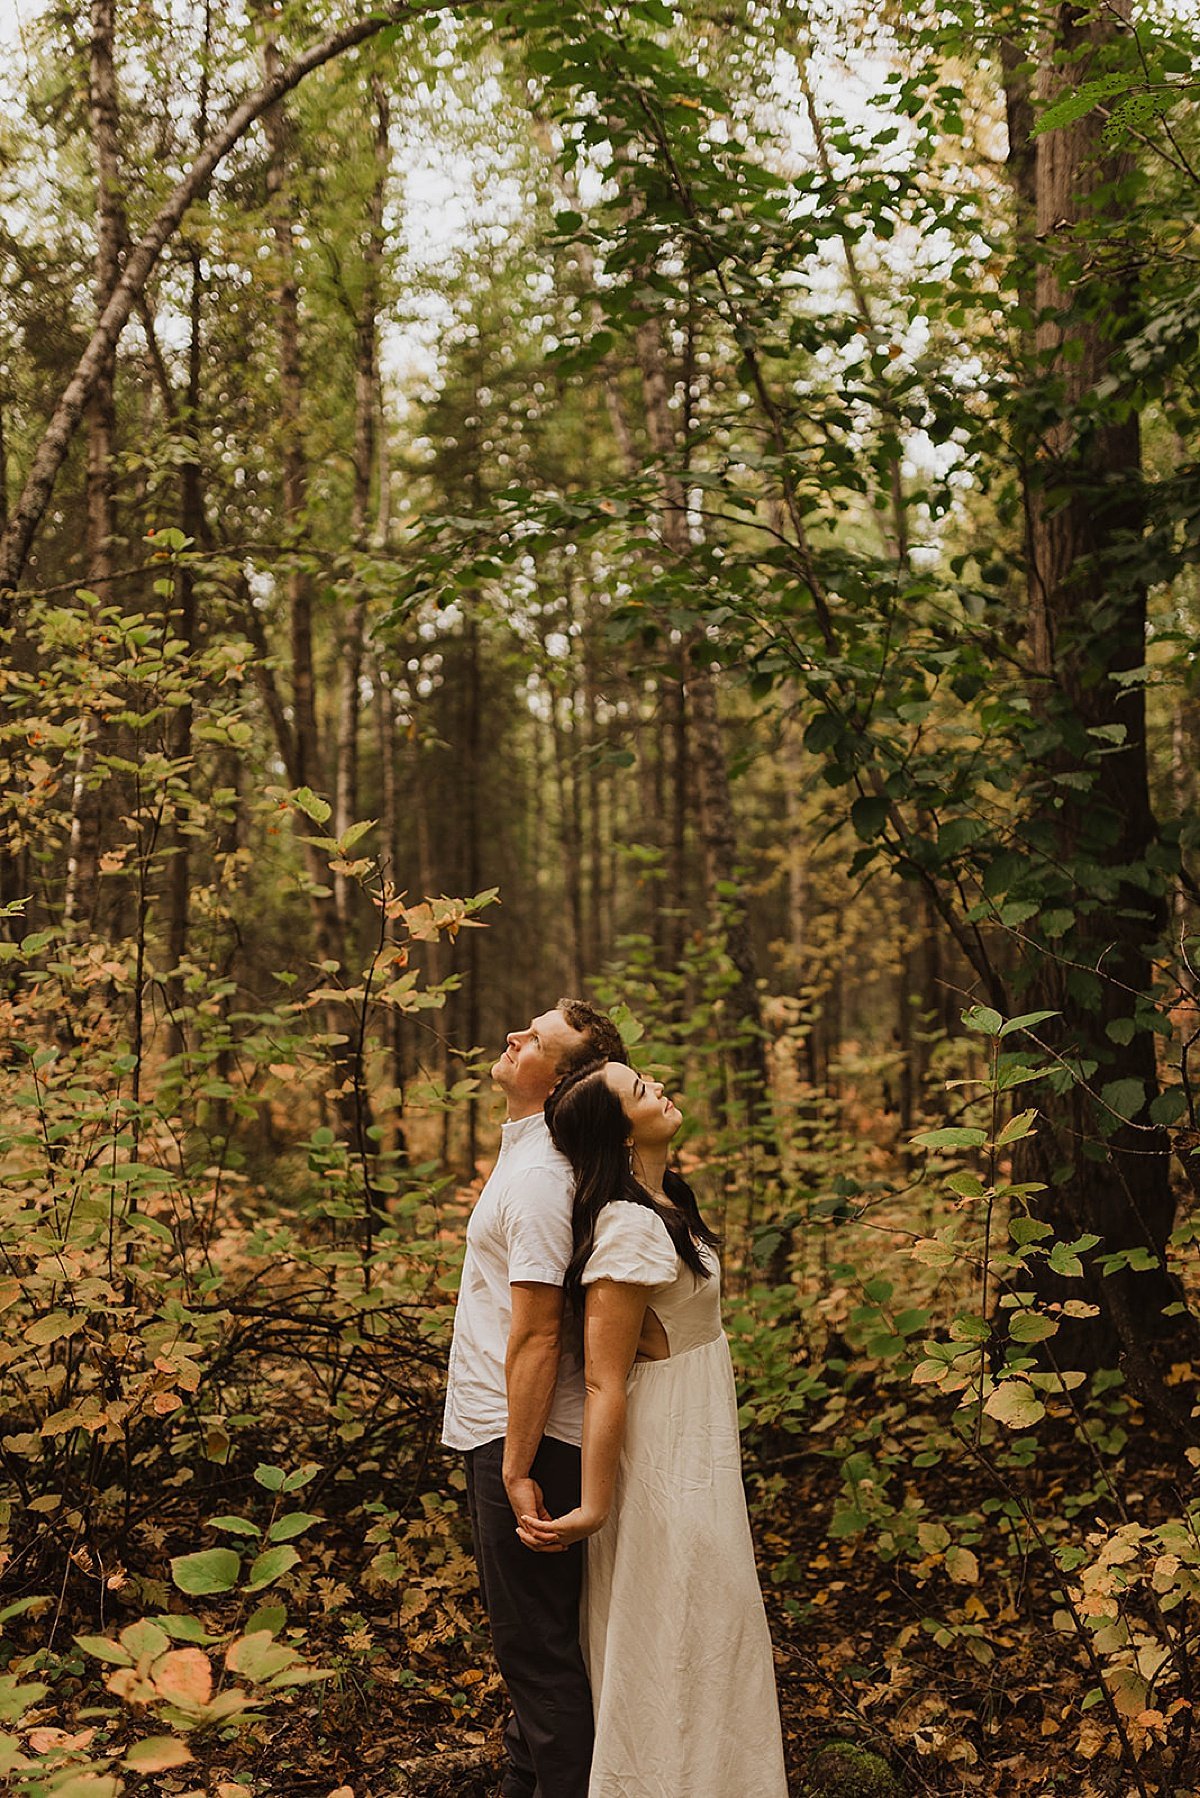  Couple stand back to back in fall leaves during cute engagement shoot 